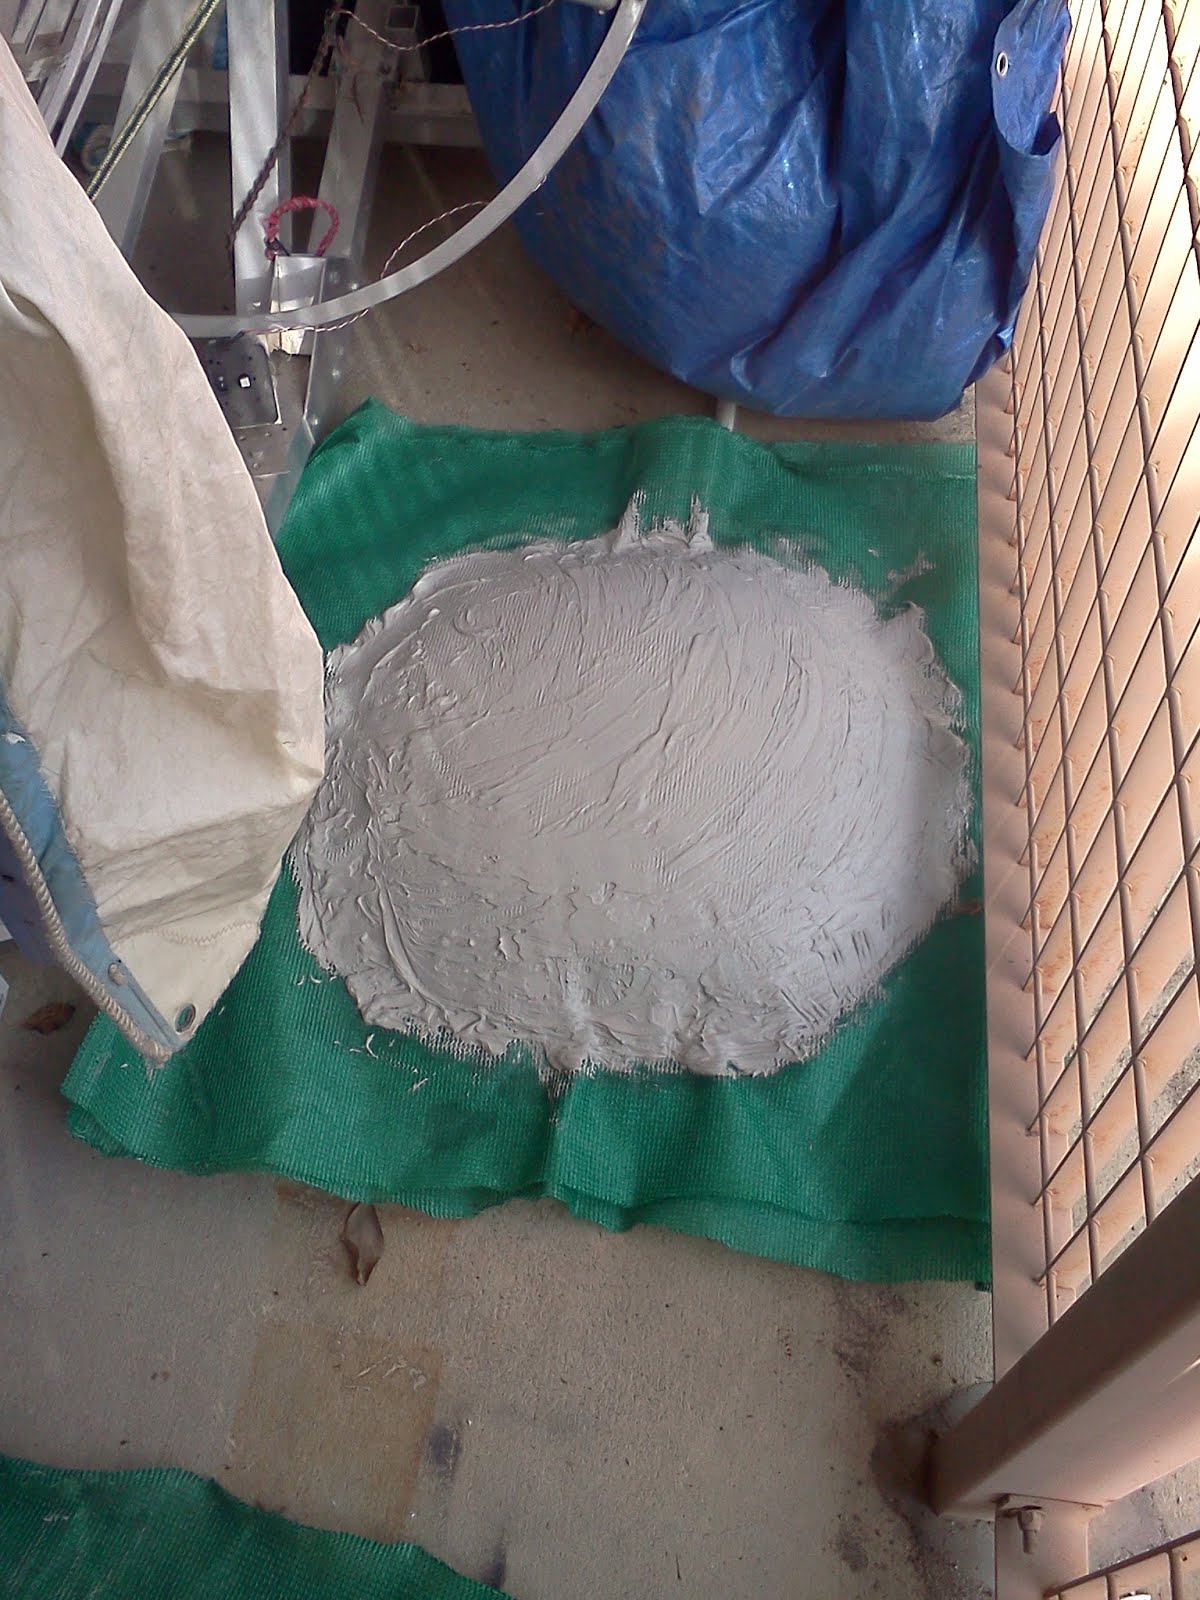 Finished latex cement lay up, waiting to cure!